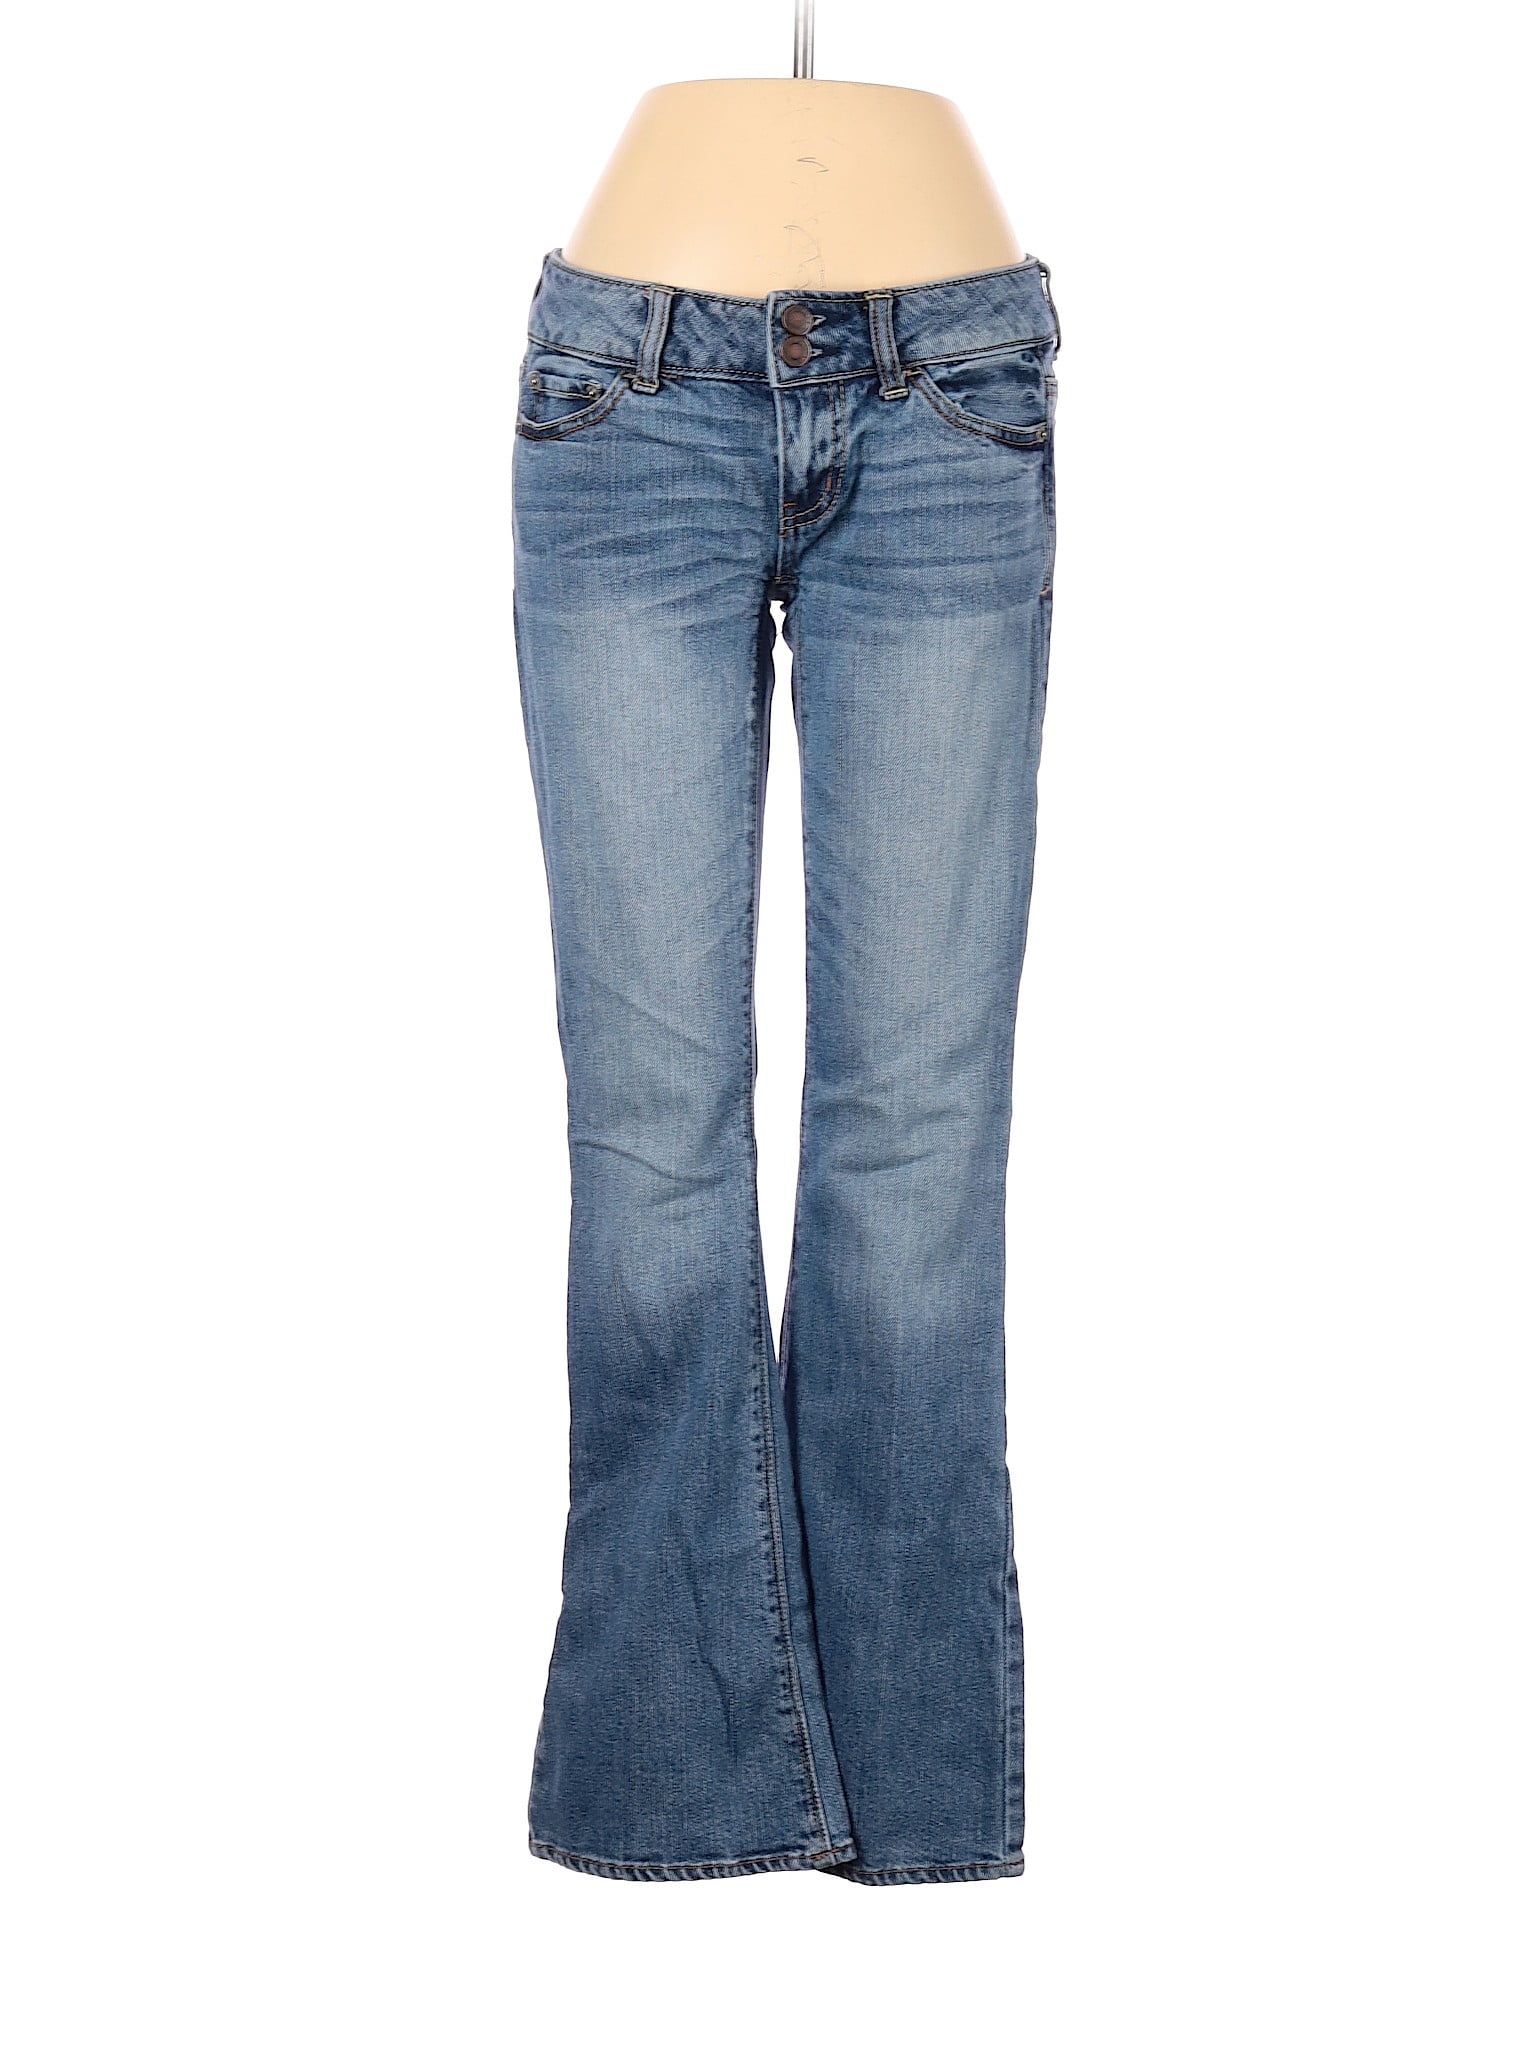 size 00 american eagle jeans